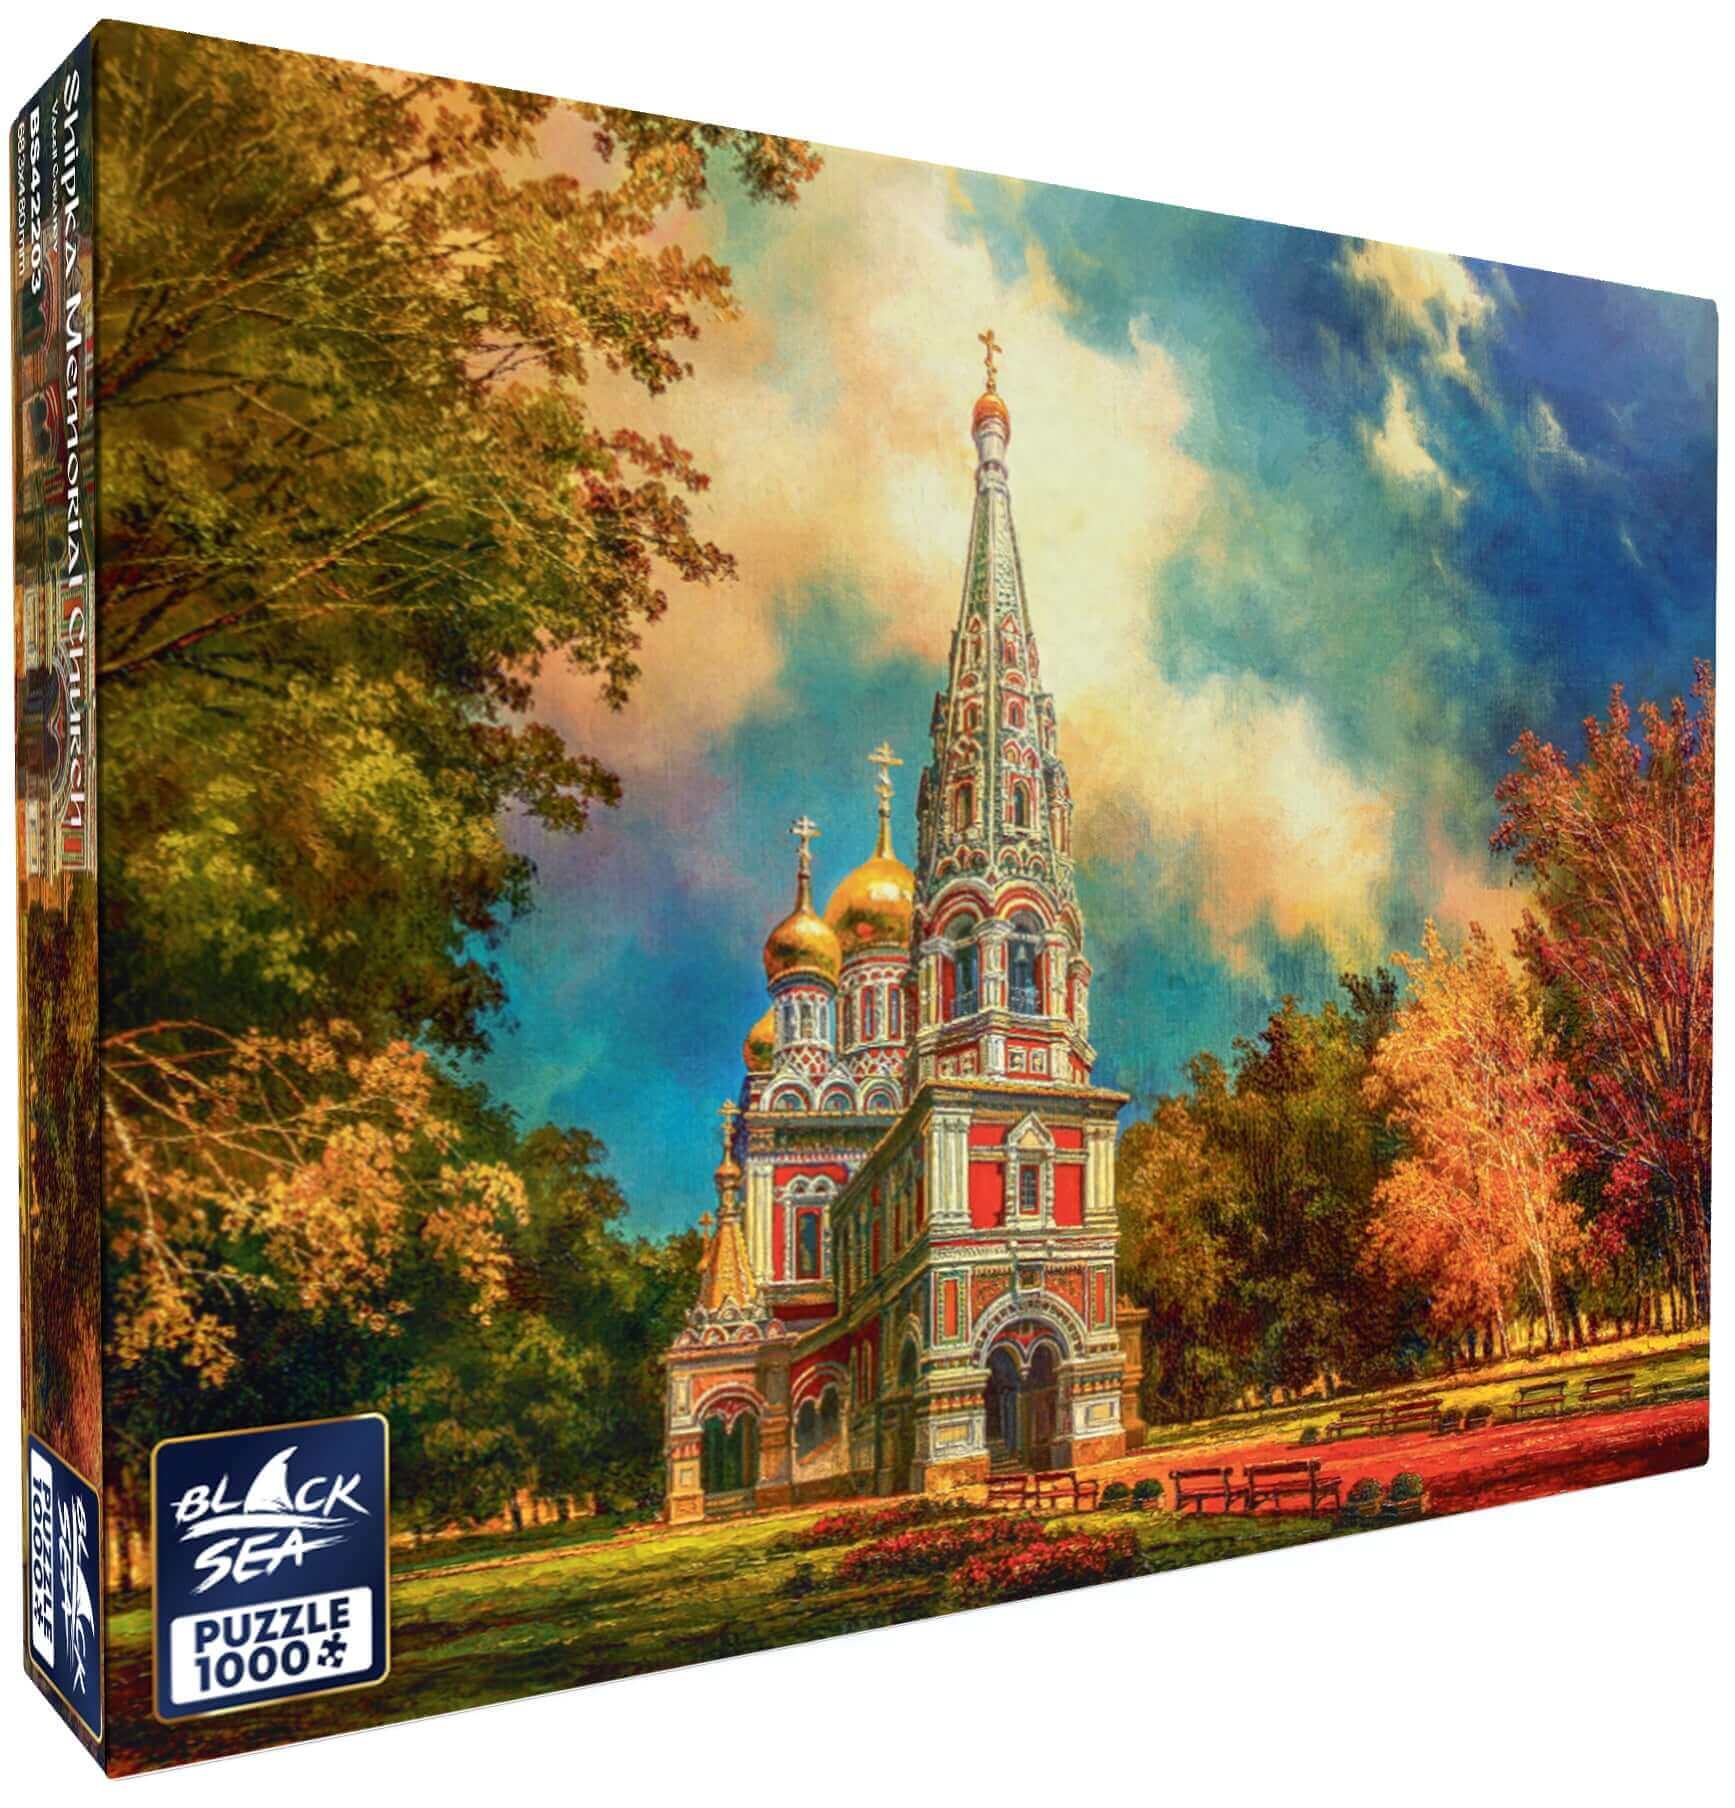 Puzzle Black Sea Premium 1000 pieces - Shipka Memorial Church, The Shipka Memorial Church is a masterpiece of church architecture; it has 17 bells that echo across the neighbouring hills during celebrations. The church is a part of an extensive complex th